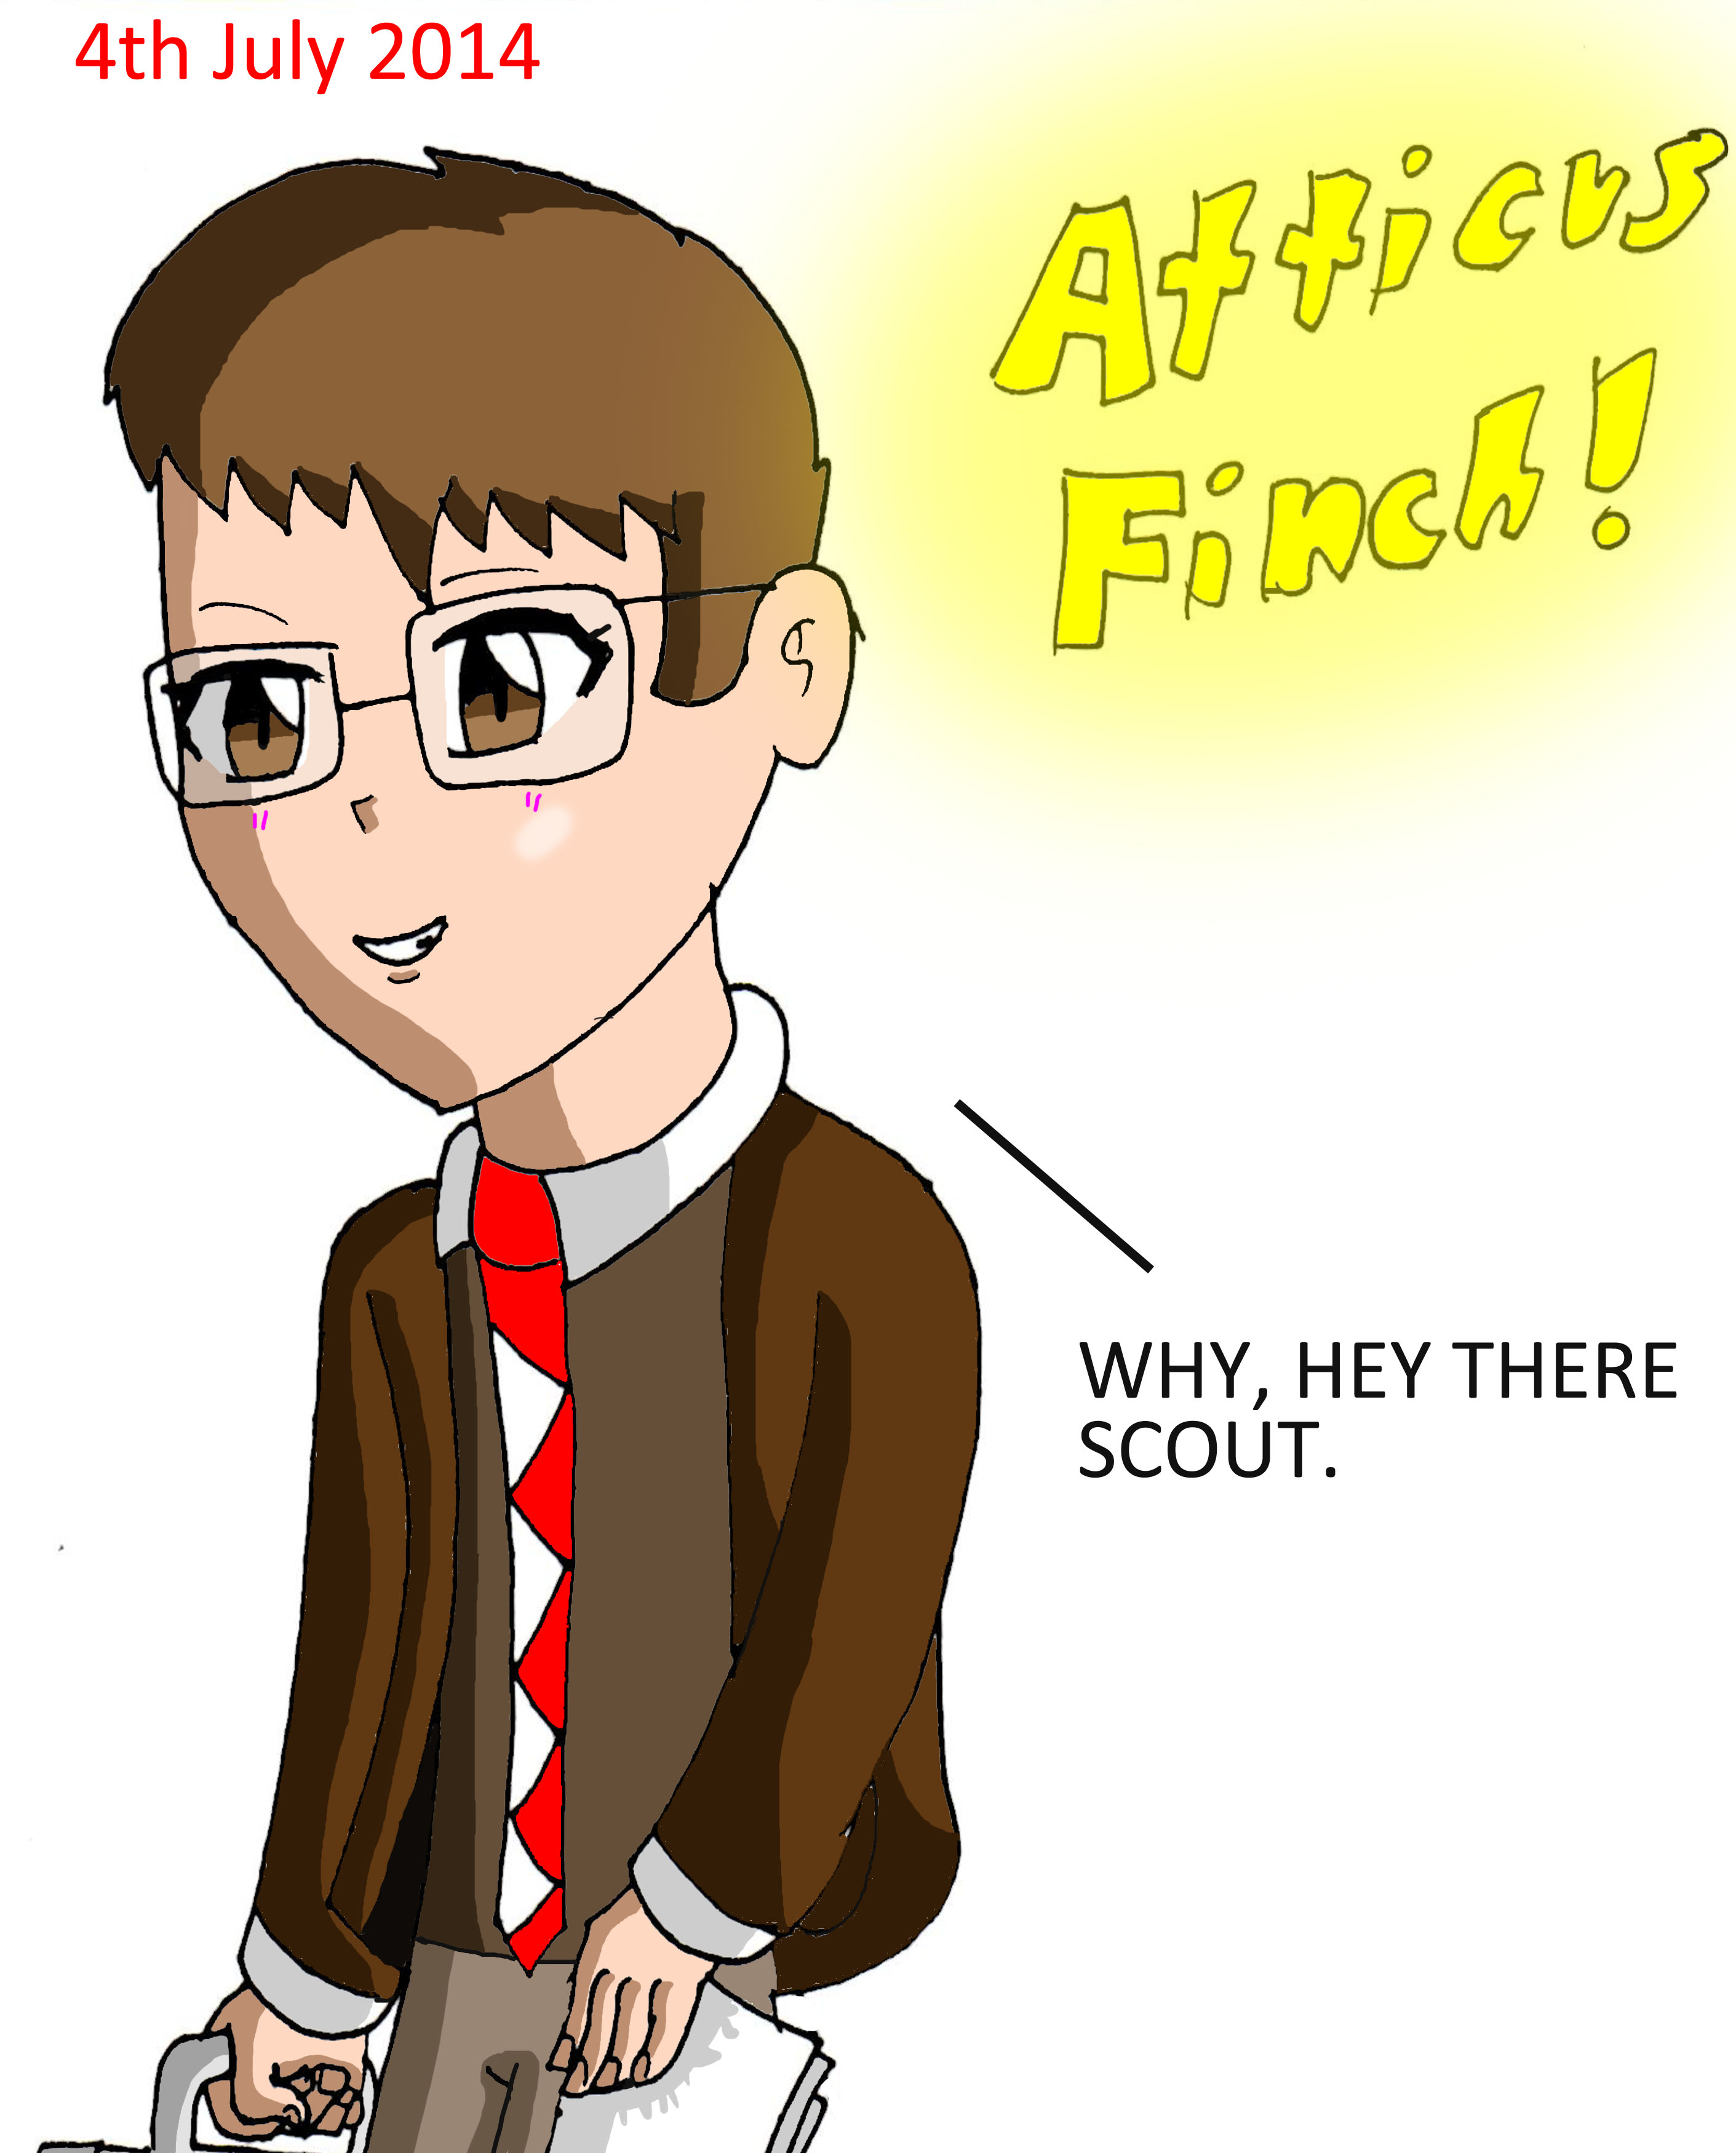 atticus finch character sketch